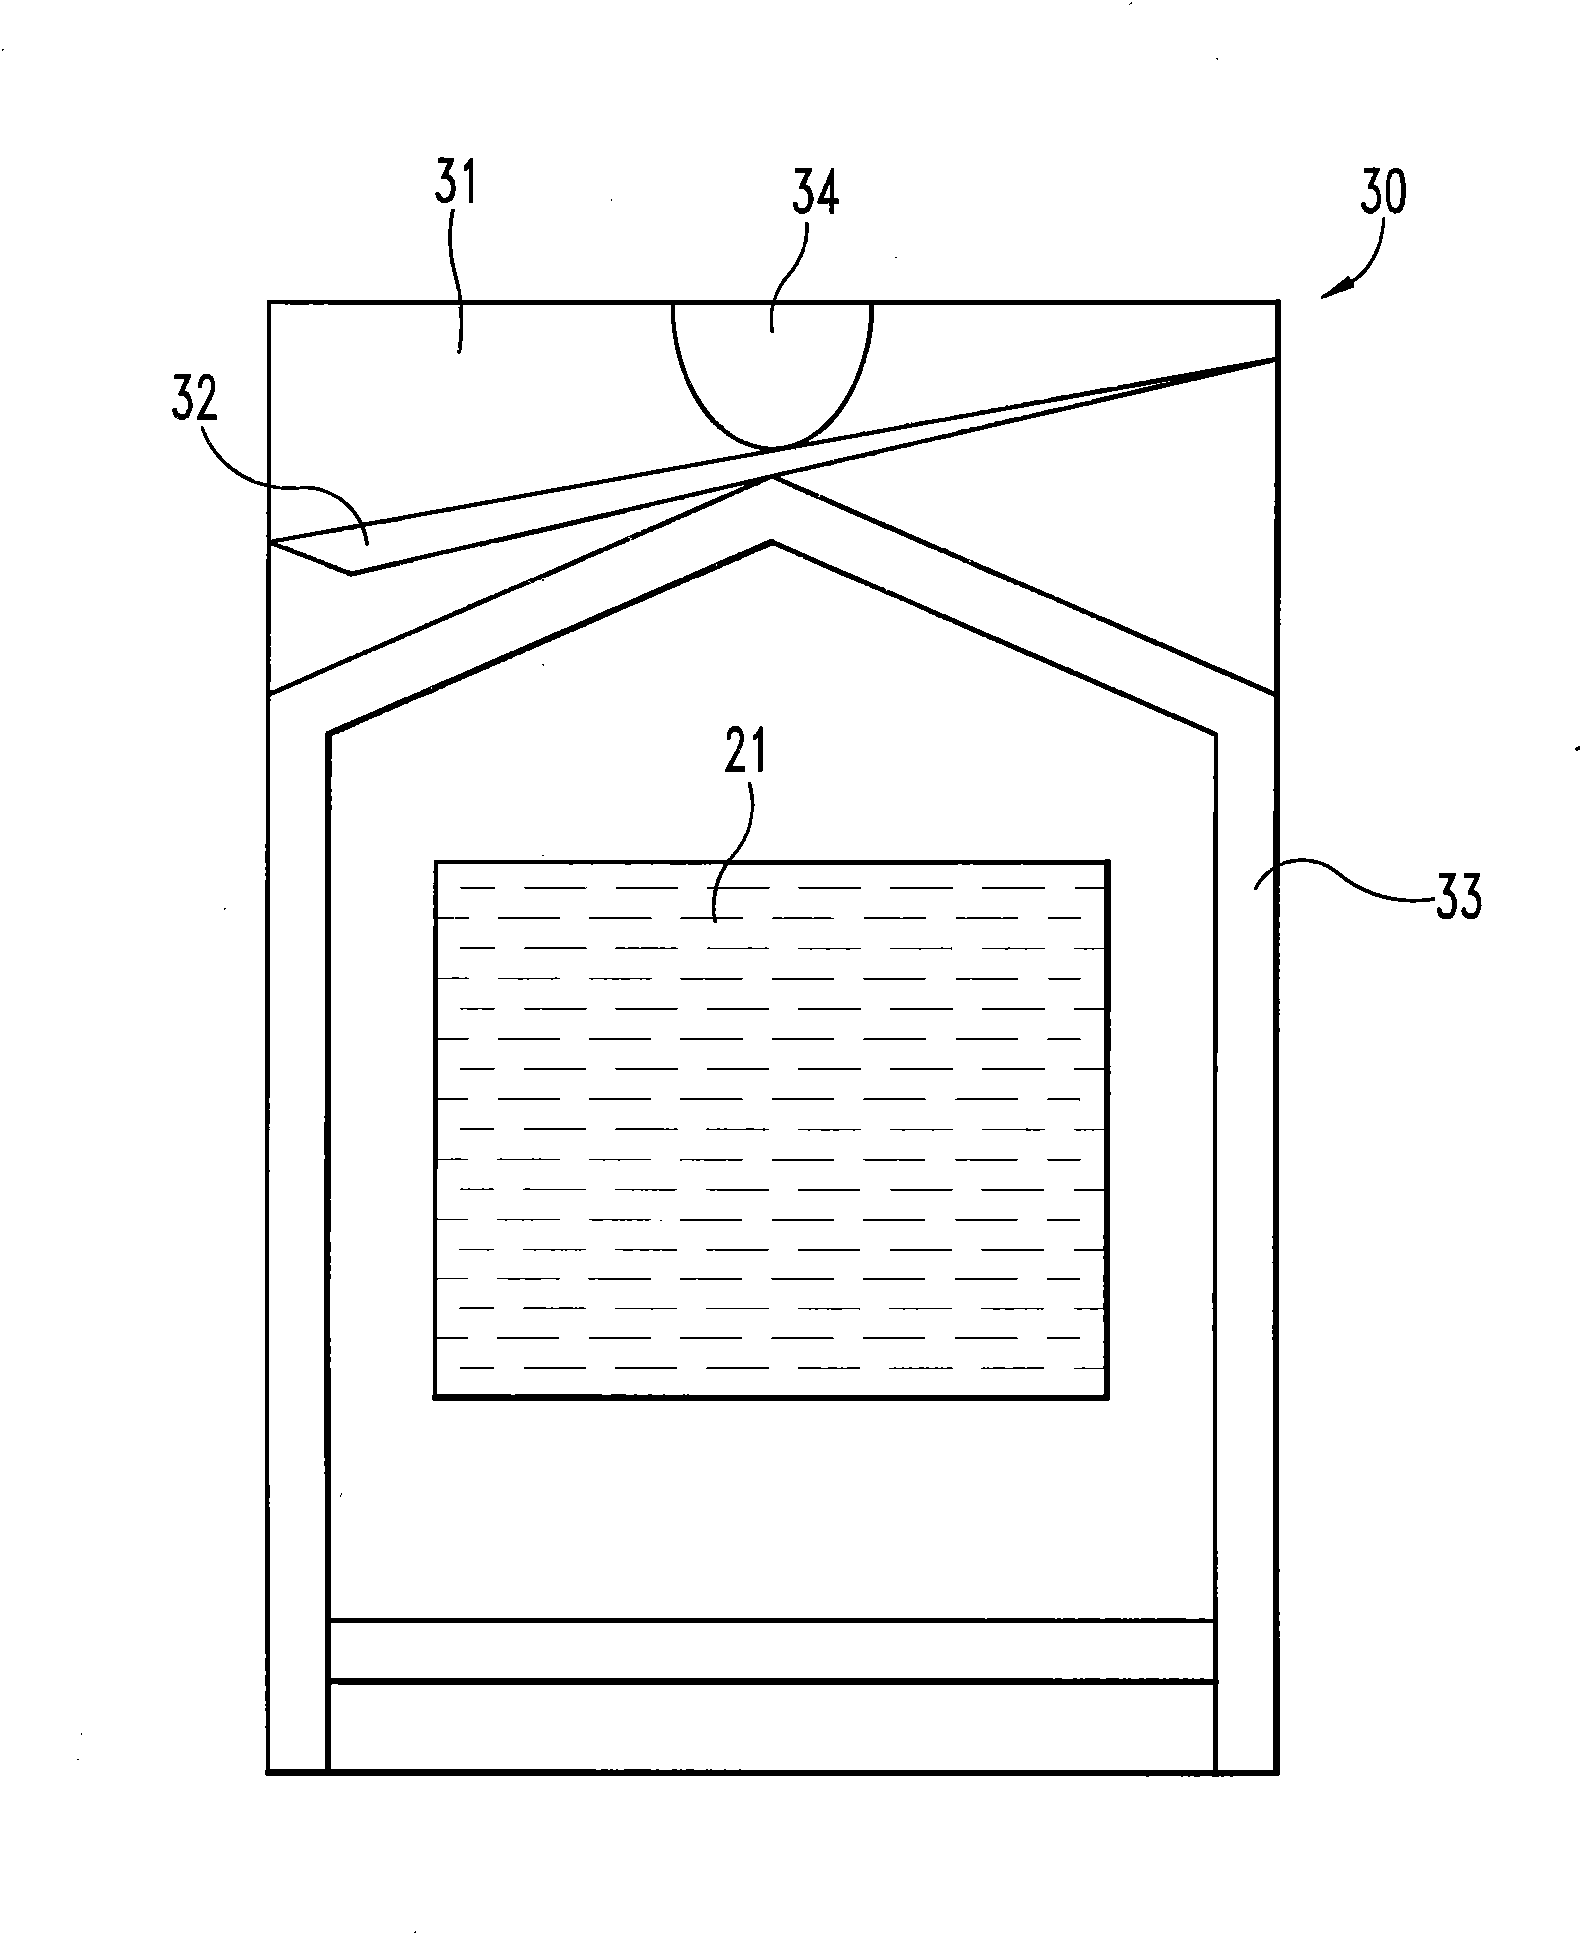 Graft materials and methods for staged delivery of bioactive components